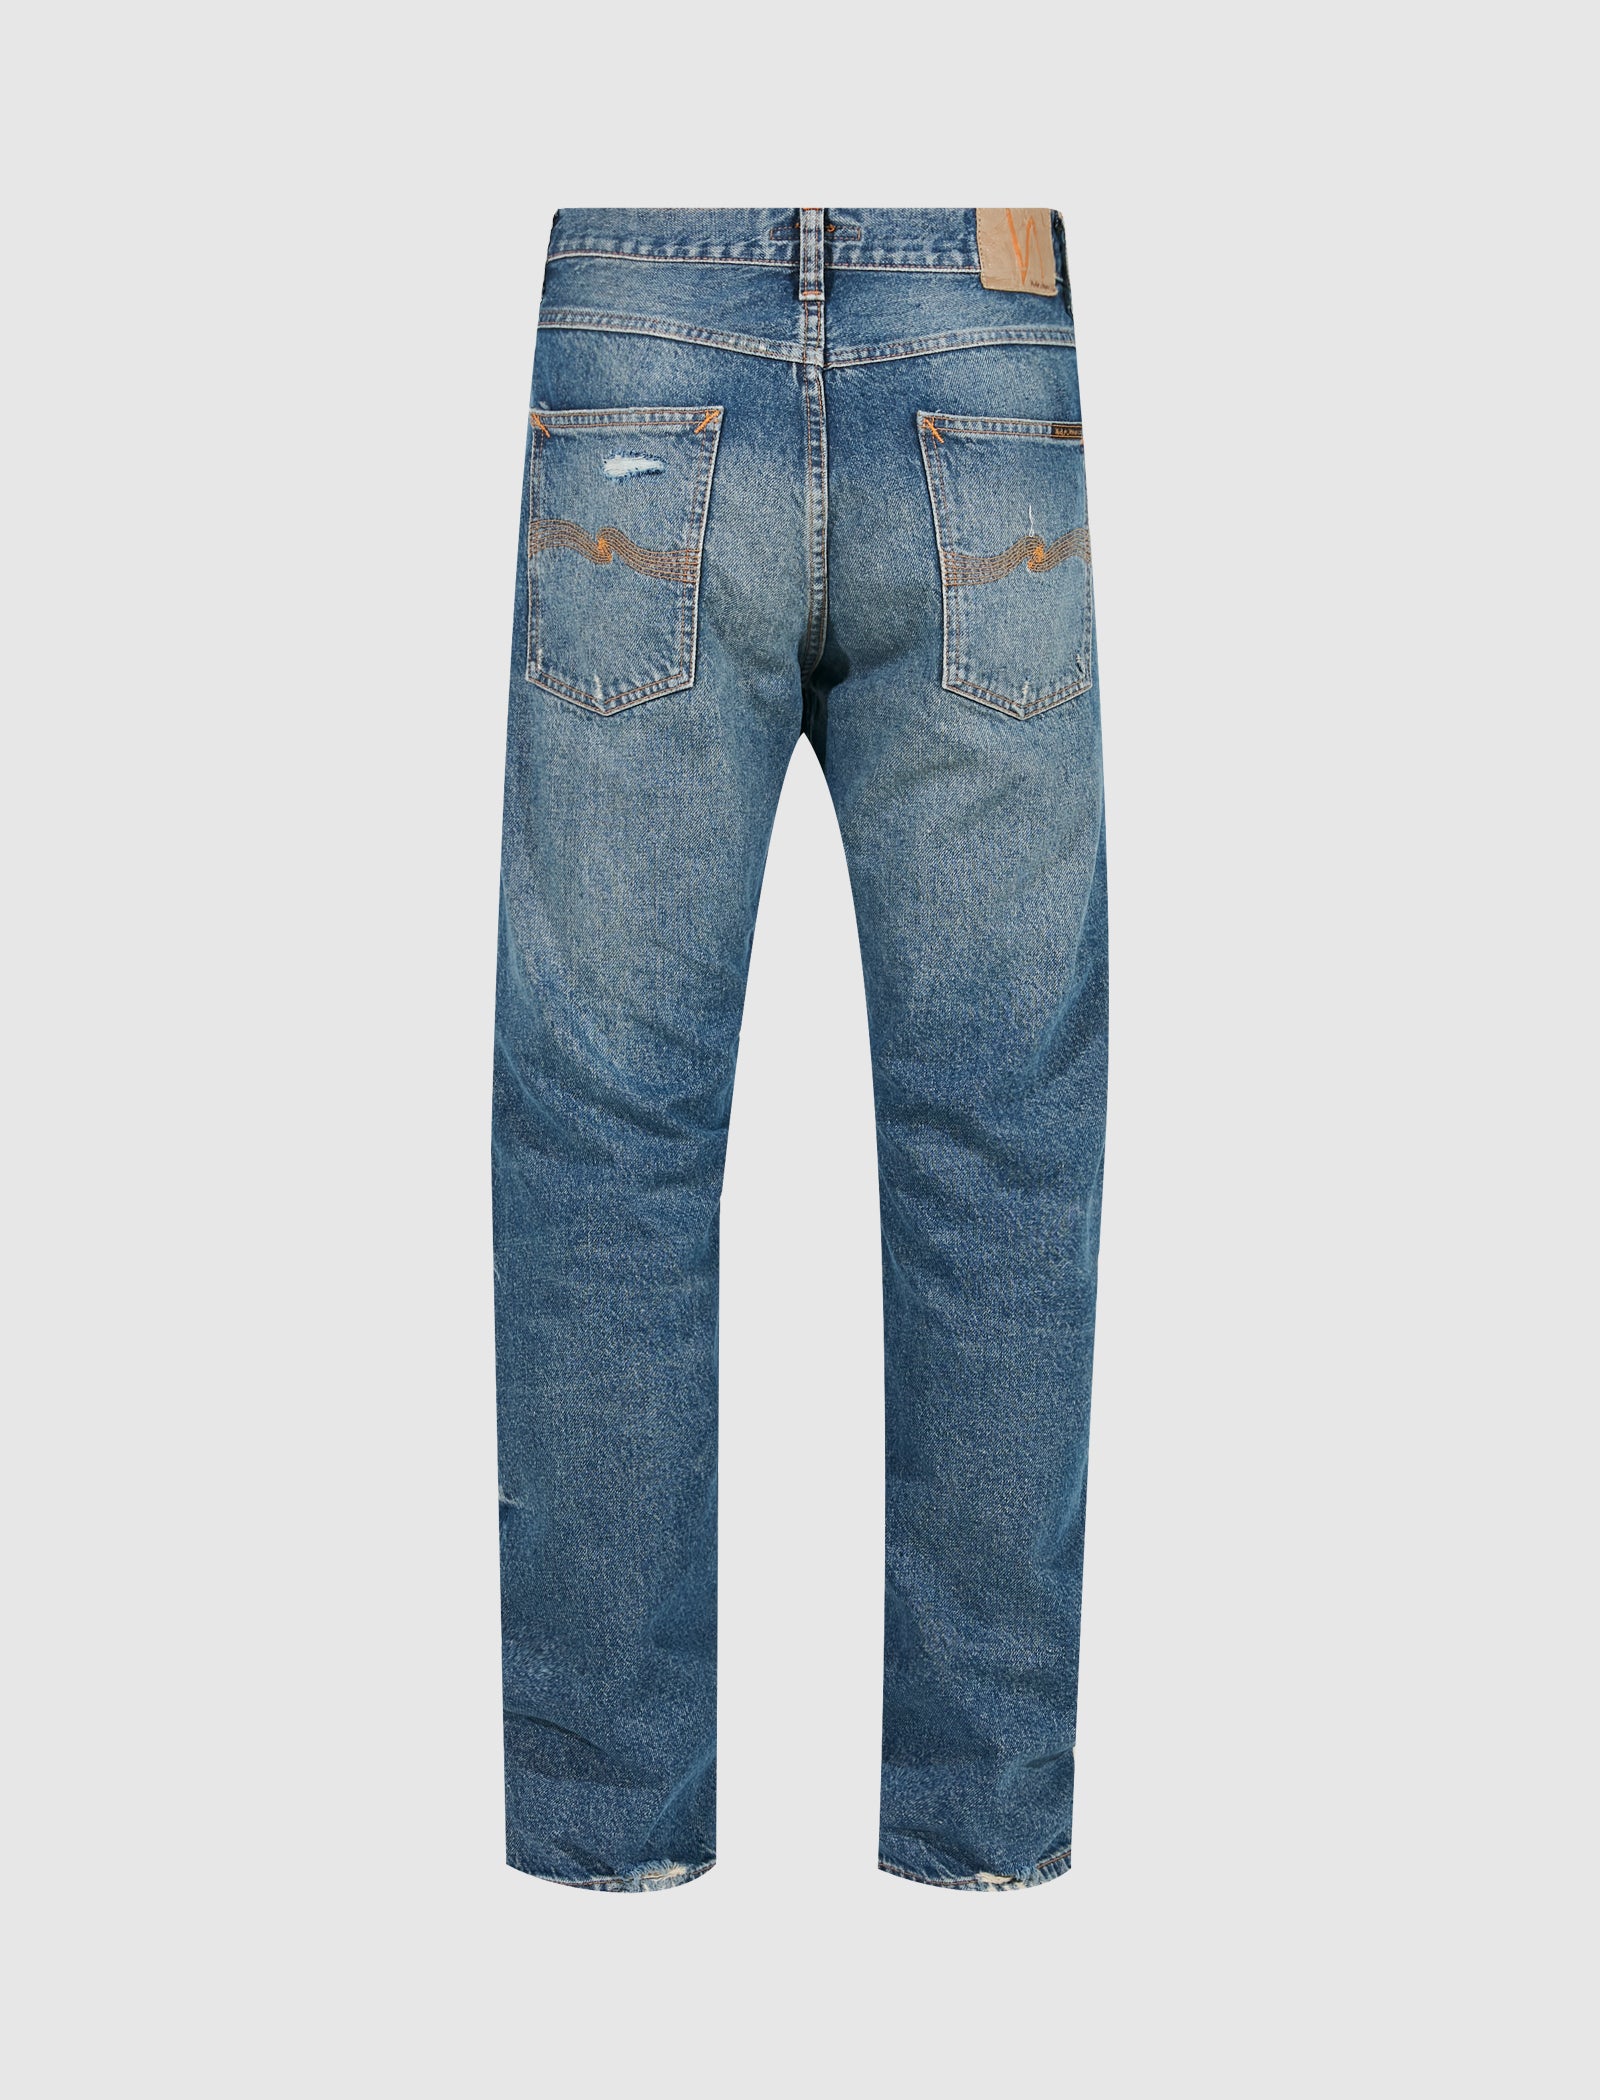 NUDIE JEANS CO. GRITTY JACKSON